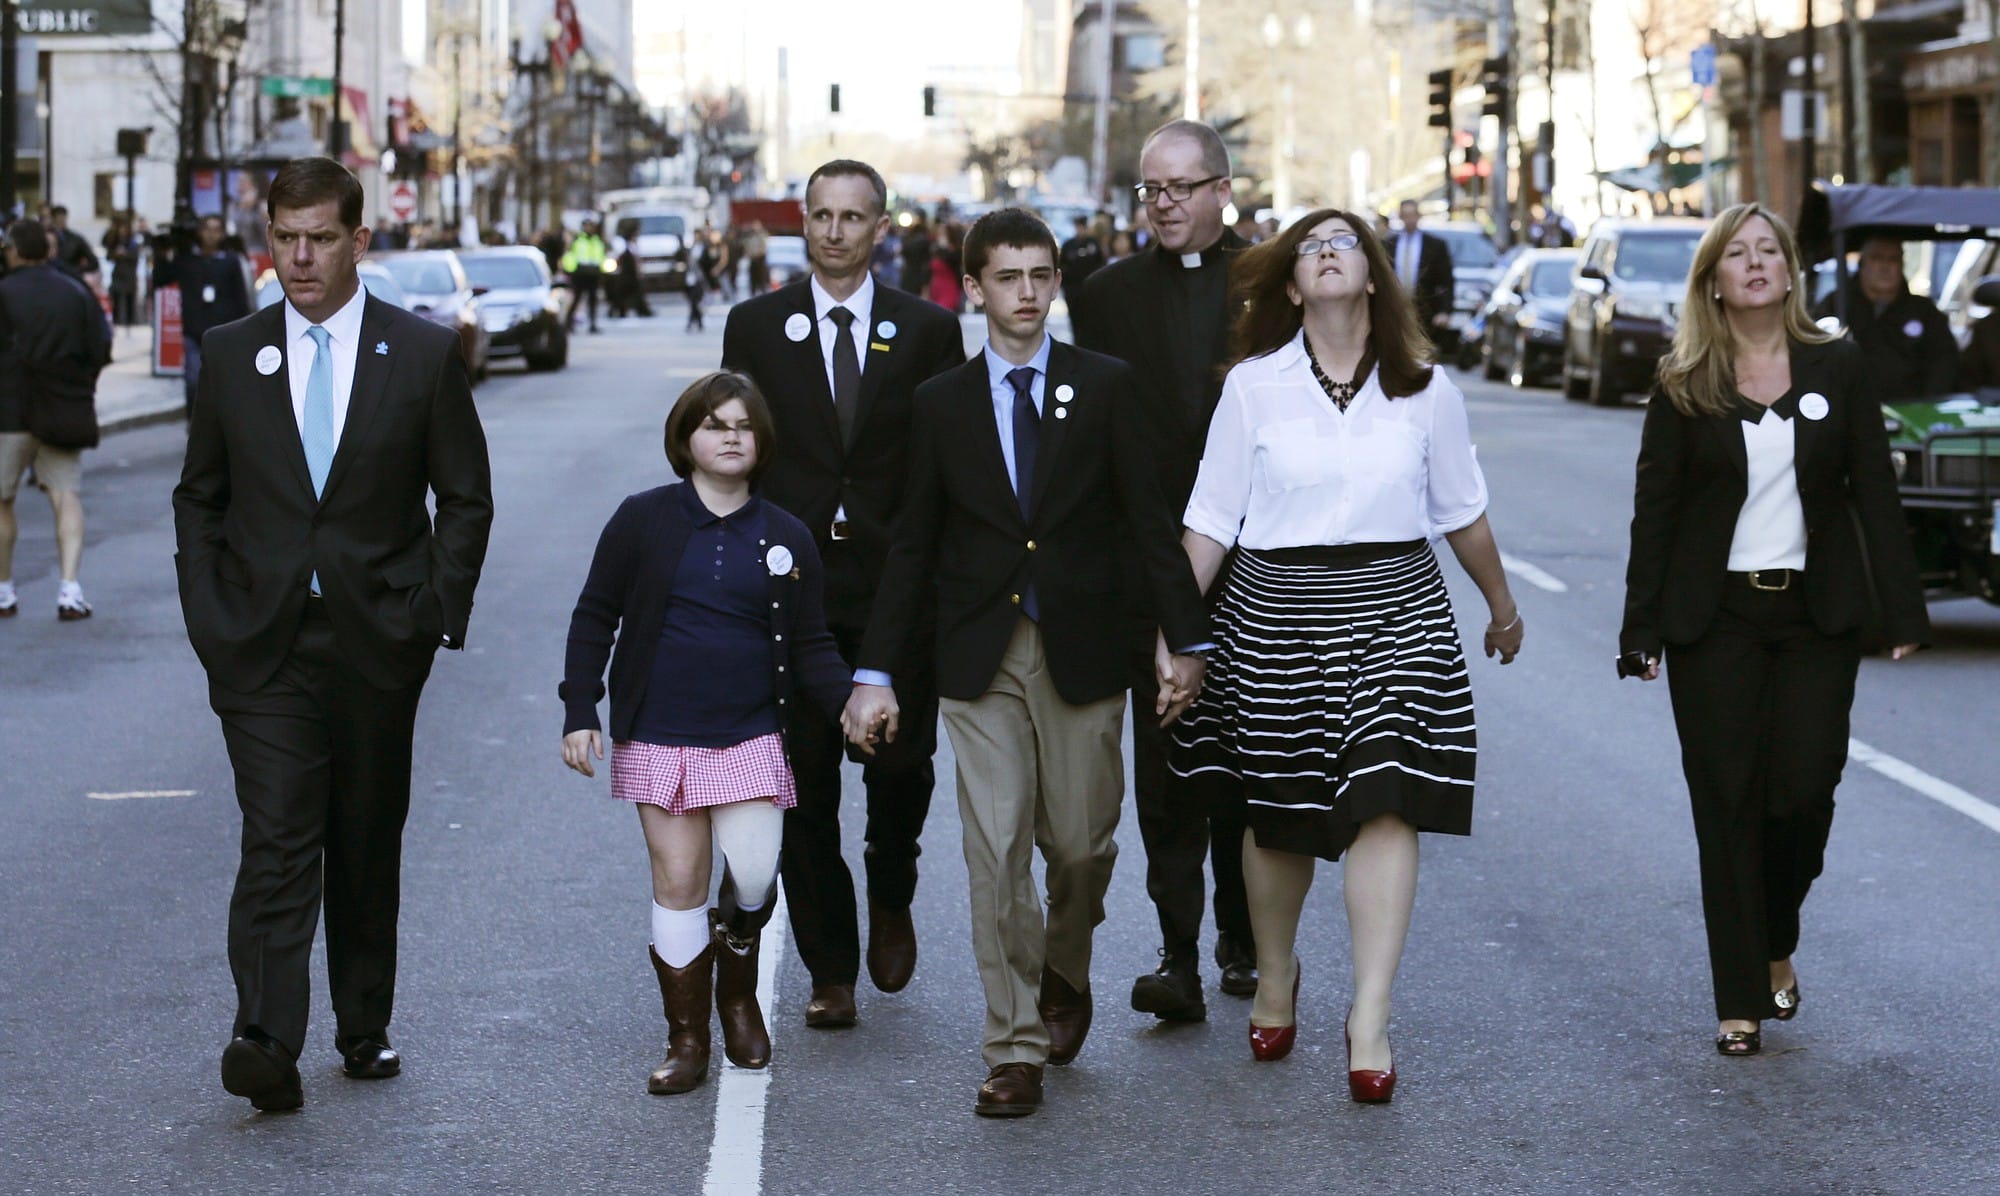 Boston Marathon survivor Jane Richard, who has a prosthetic left leg, holds the hand of her brother Henry, center, as their family walks down Boylston Street with Boston Mayor Marty Walsh, left, after a ceremony Wednesday honoring victims and survivors at one of two blast sites near the finish line of the Boston Marathon.